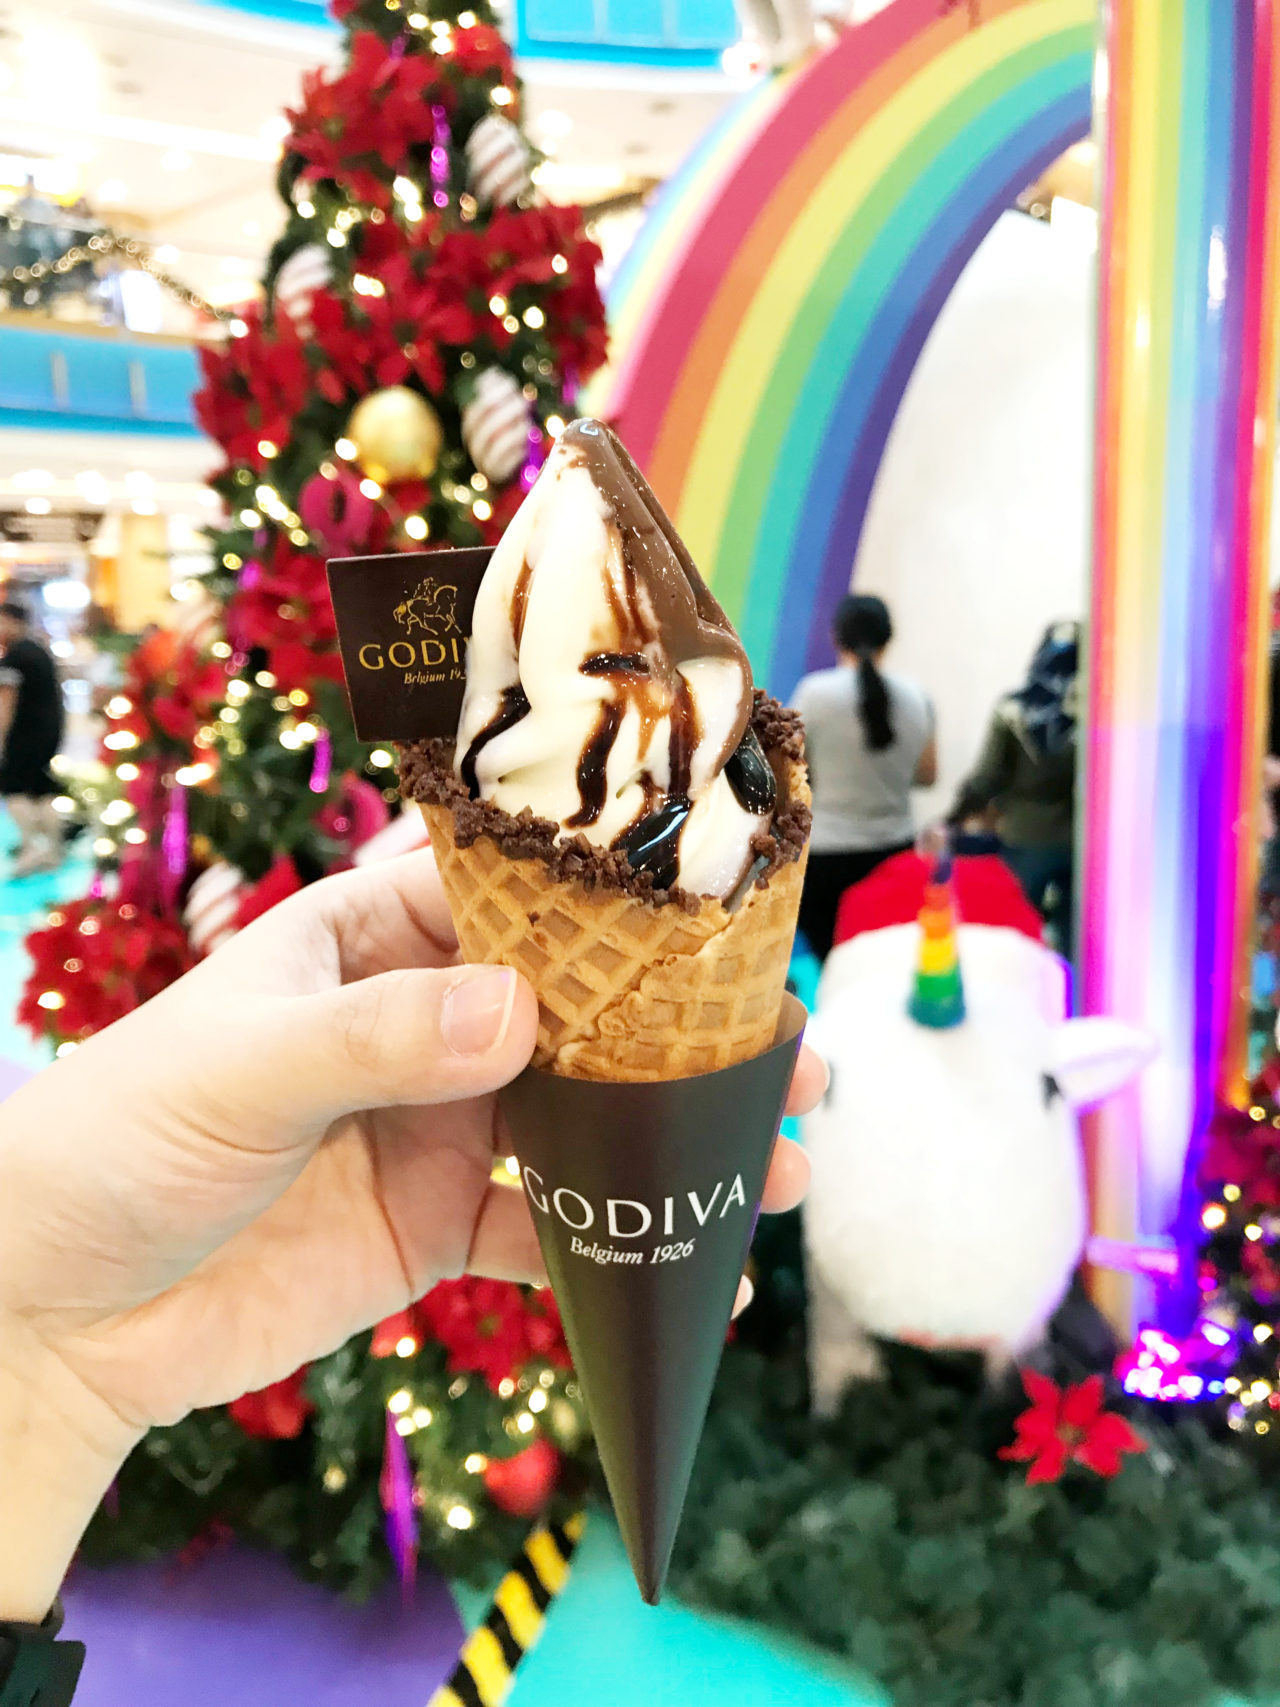 To sweeten up your rainbow journey, grab a Godiva Soft Serve Ice Cream at the Godiva Booth!